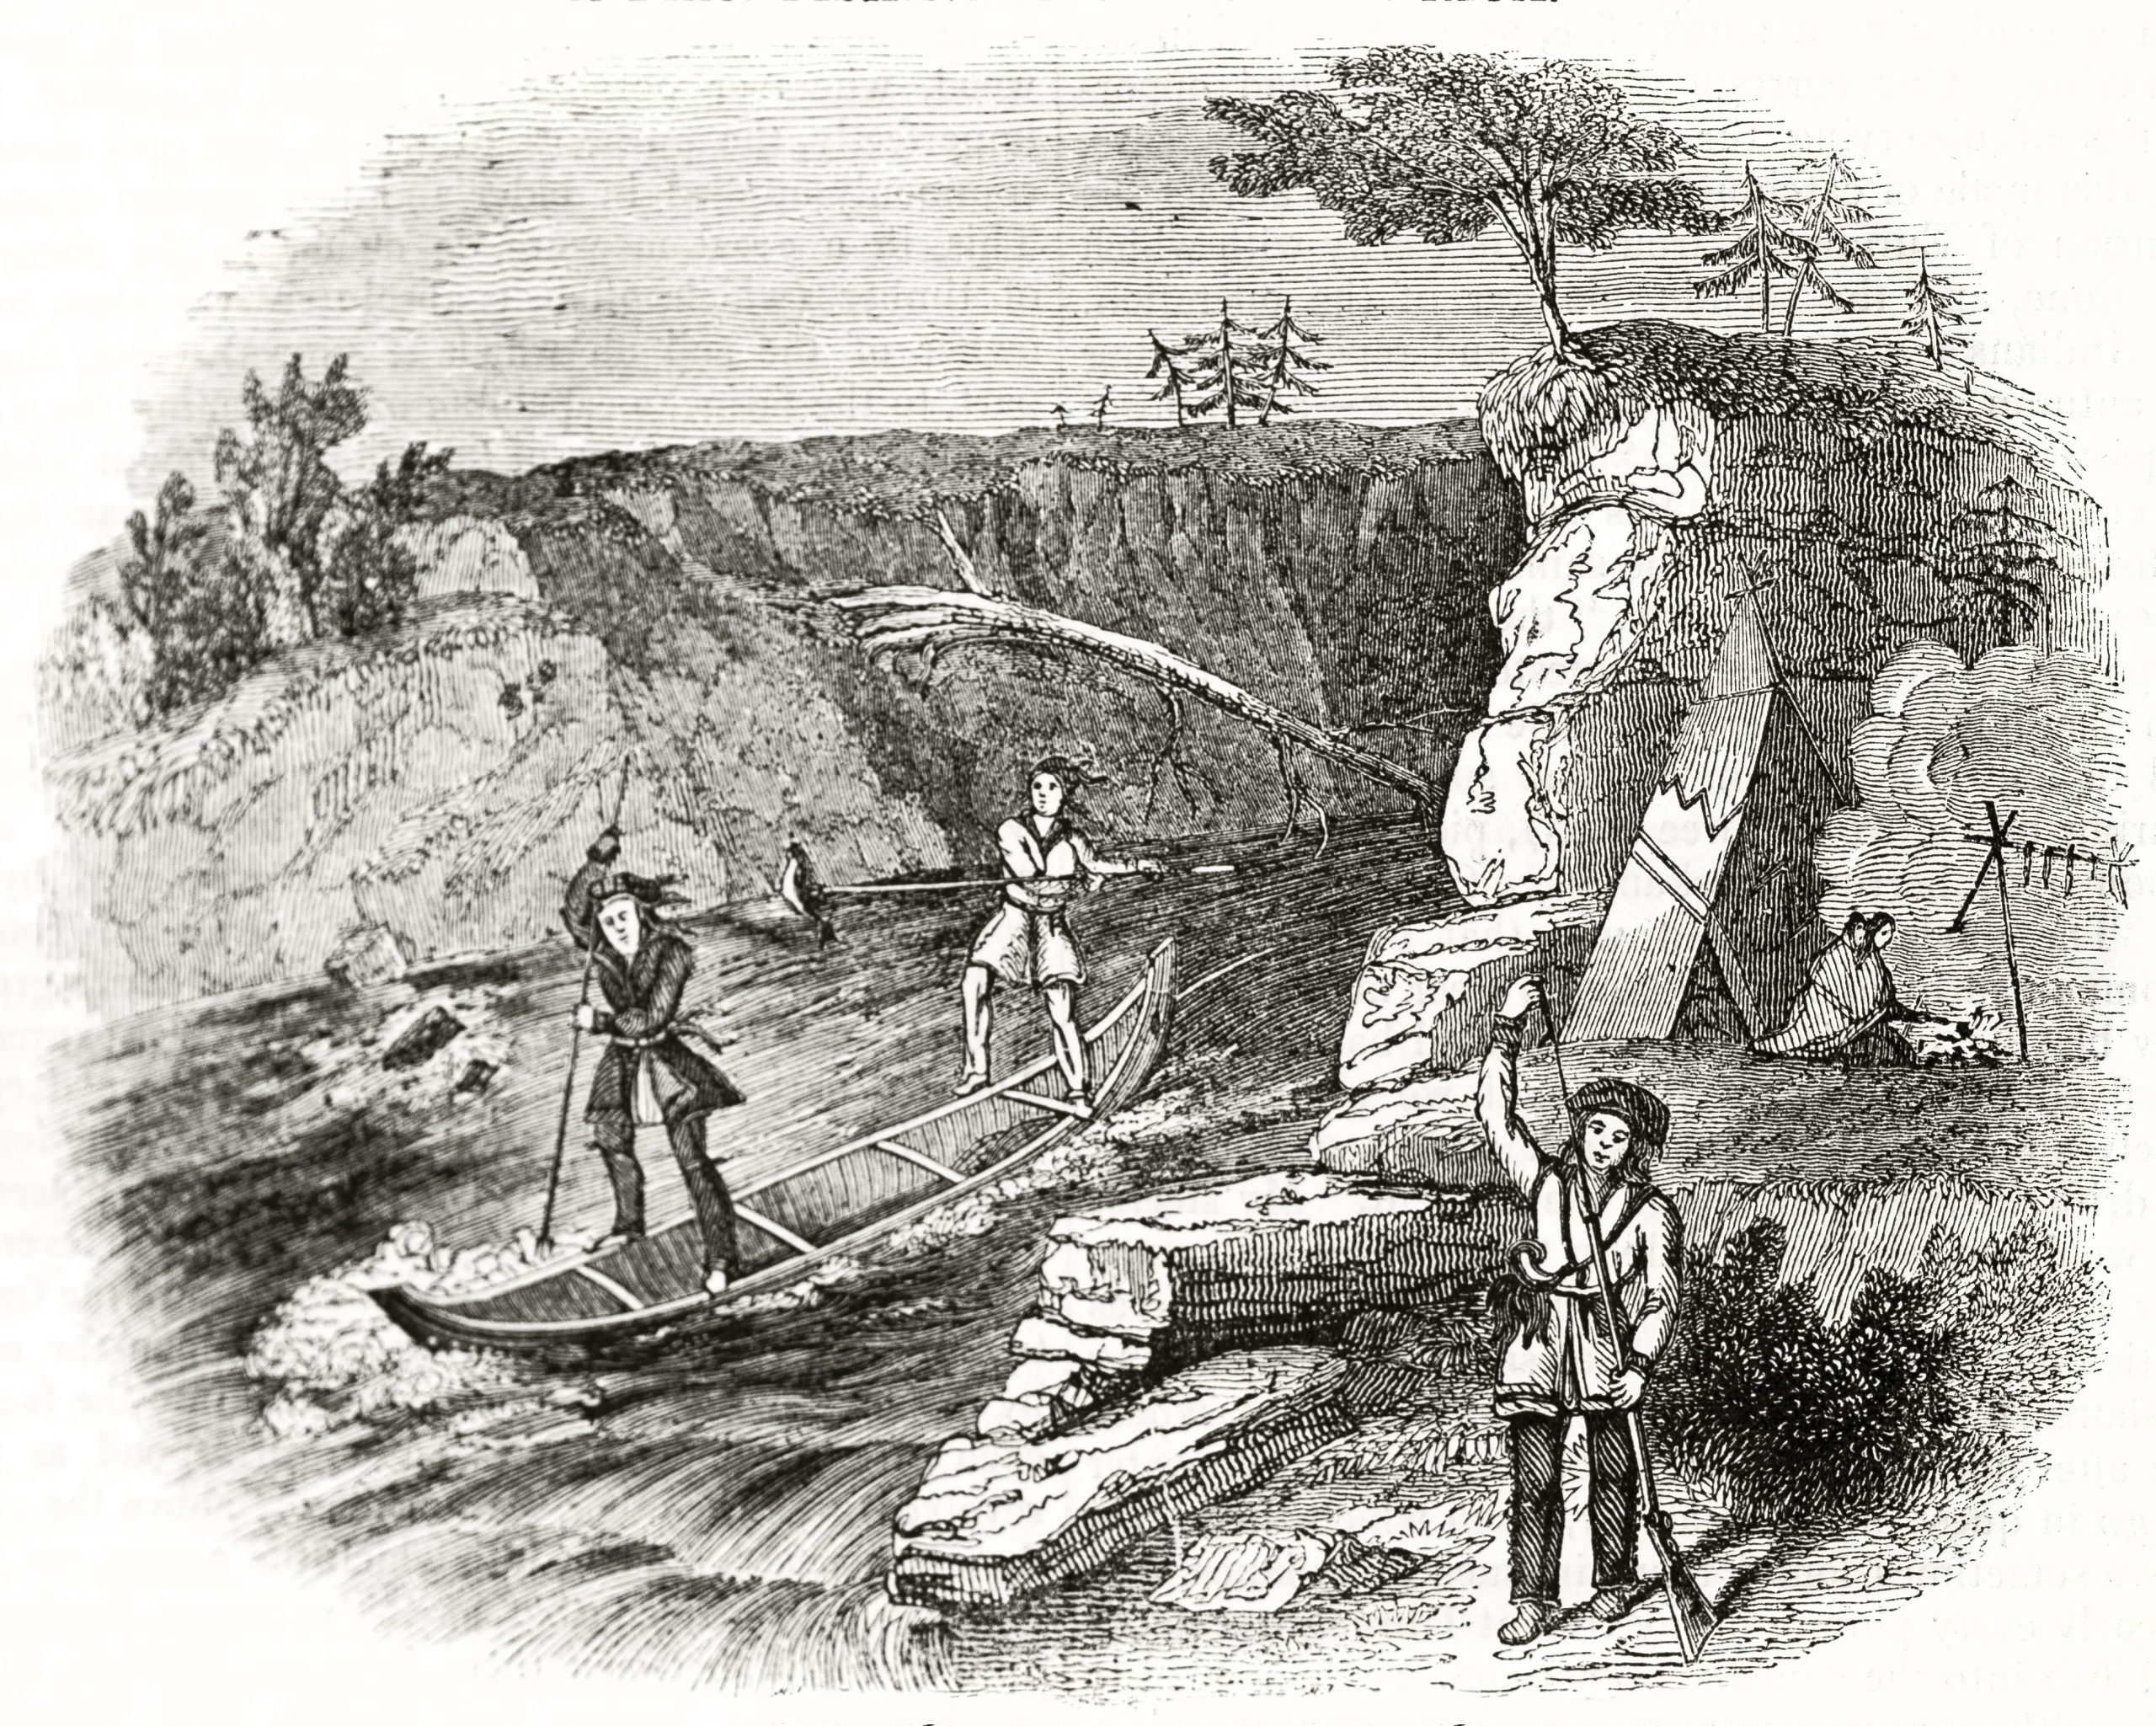 Early American Explorers